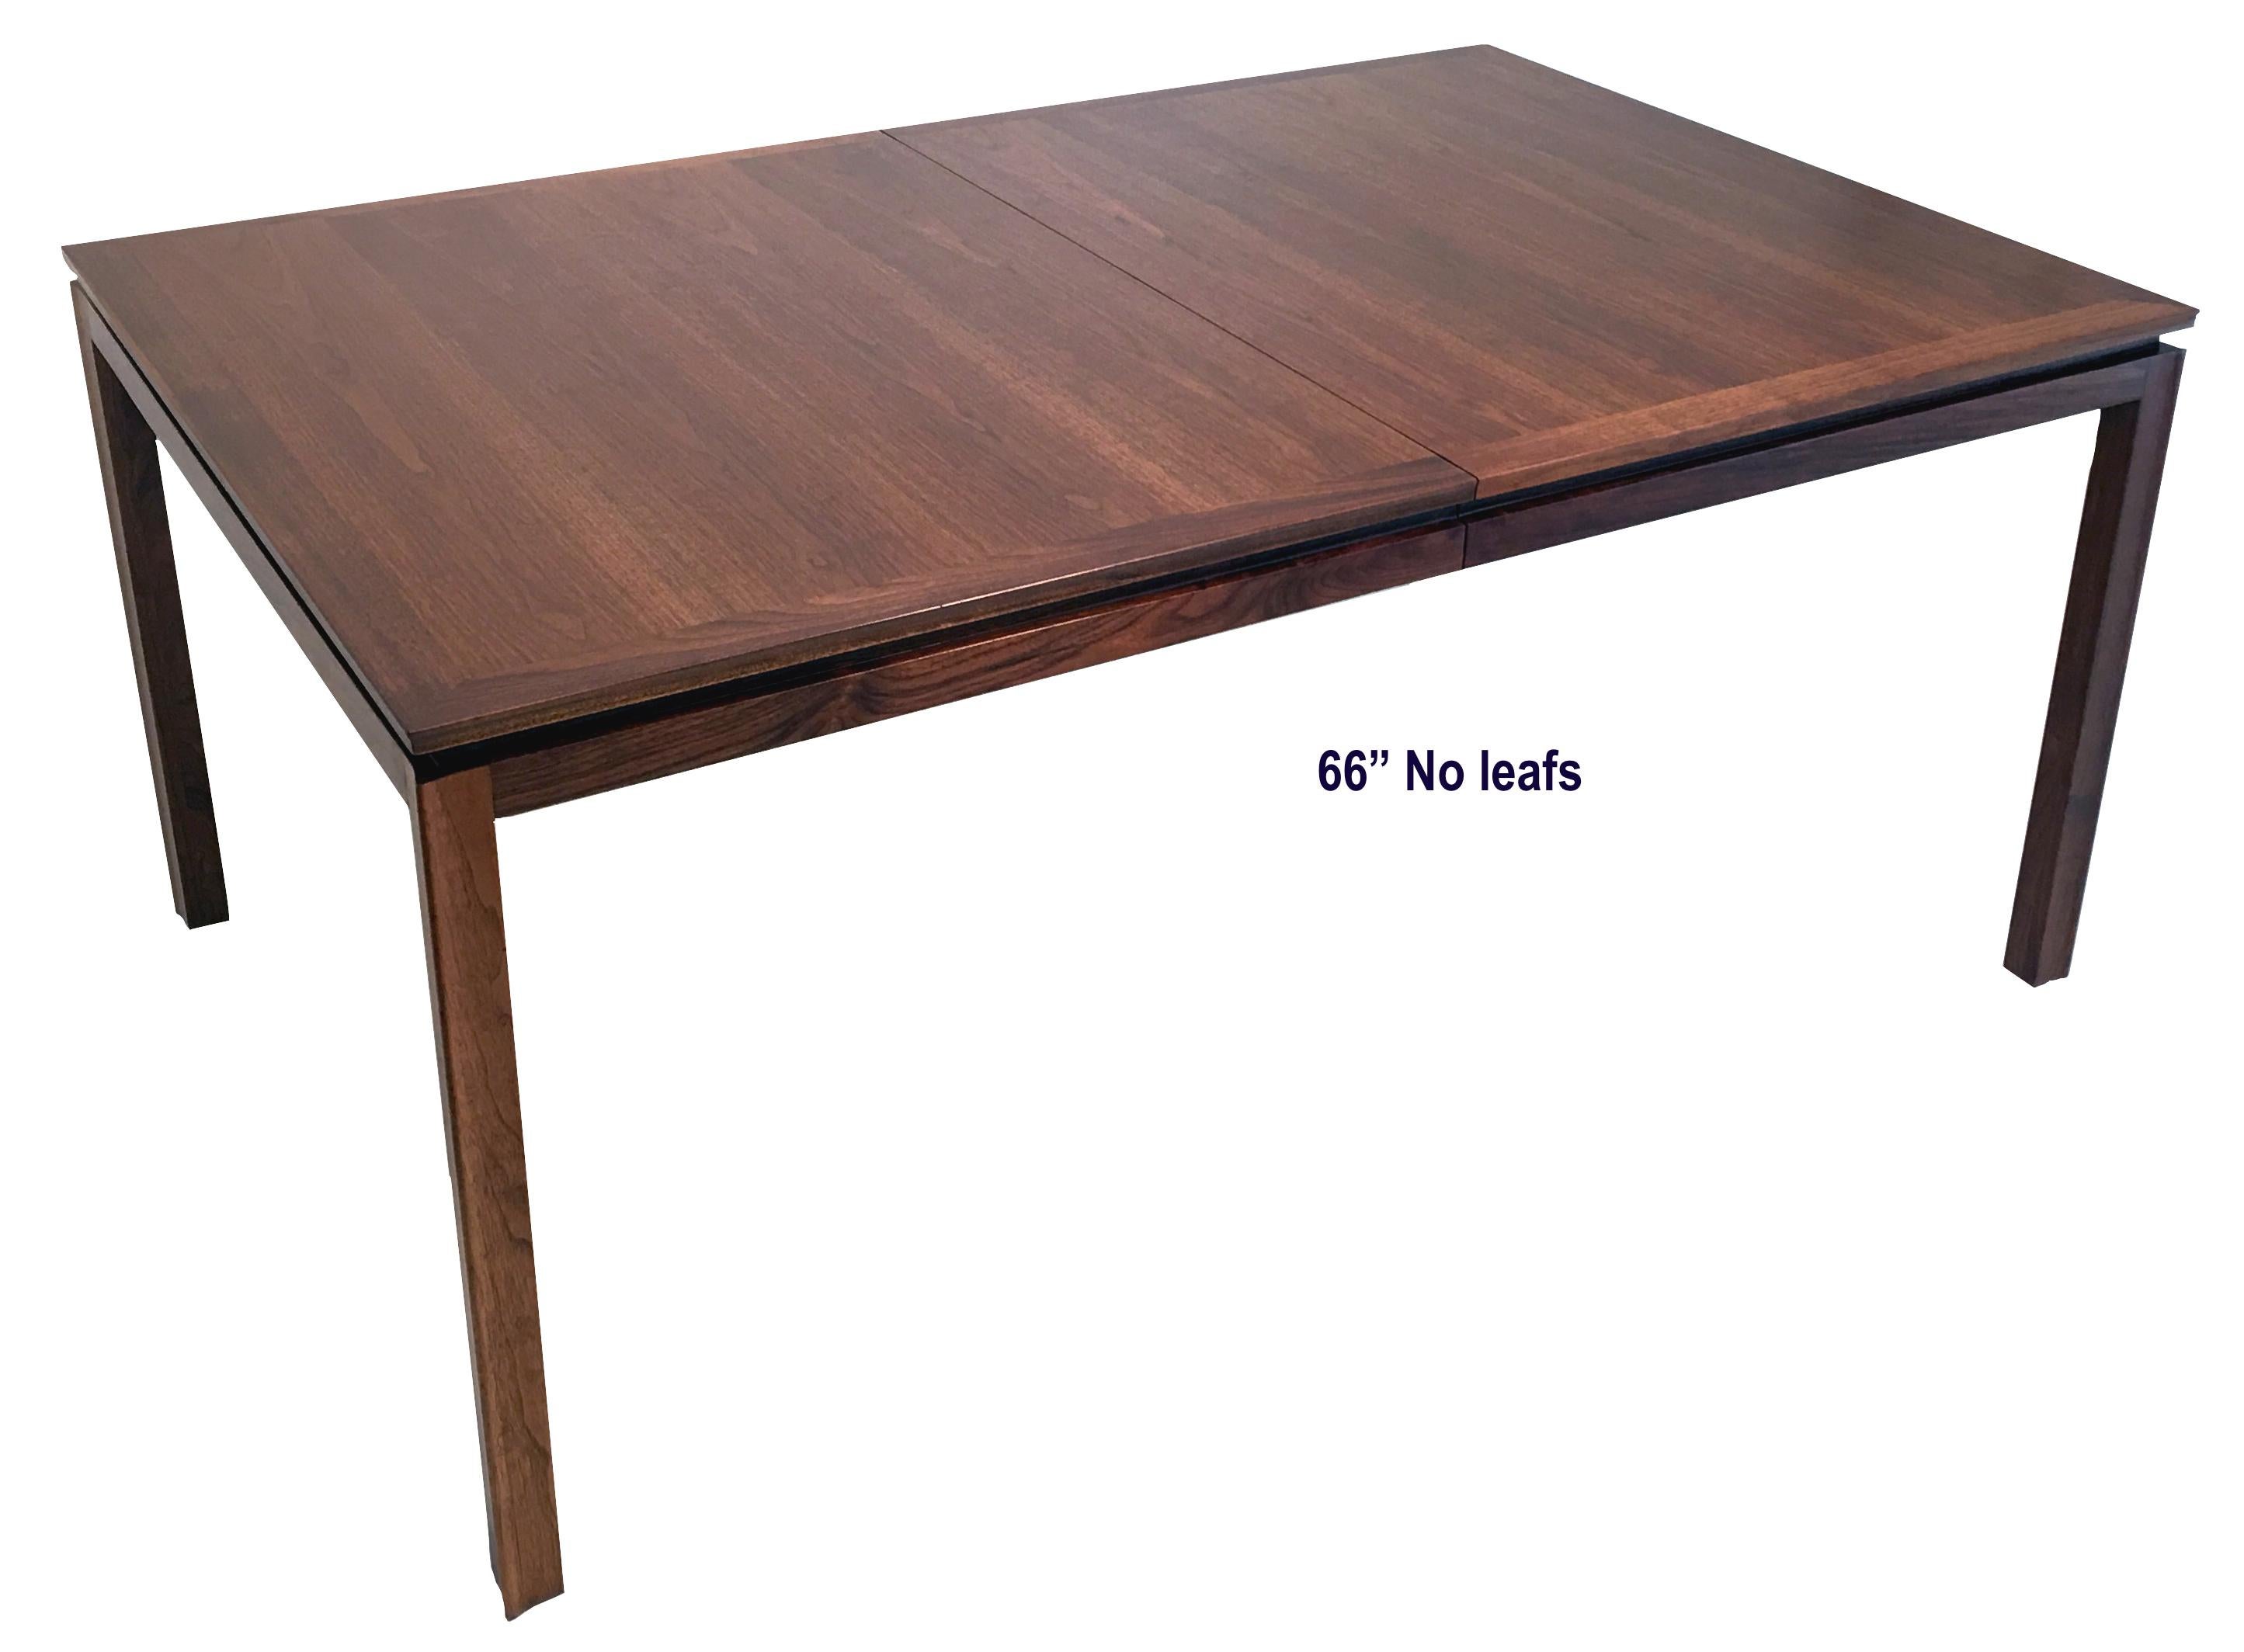 Dunbar, USA circa 1969, Janus series. Edward Wormley. Oiled walnut, entirely restored and like new. Rectangular table measures 114 long x 44.25 wide and 29.5 inches tall
Comfortably seats 10 and capable of 12.  It is 66